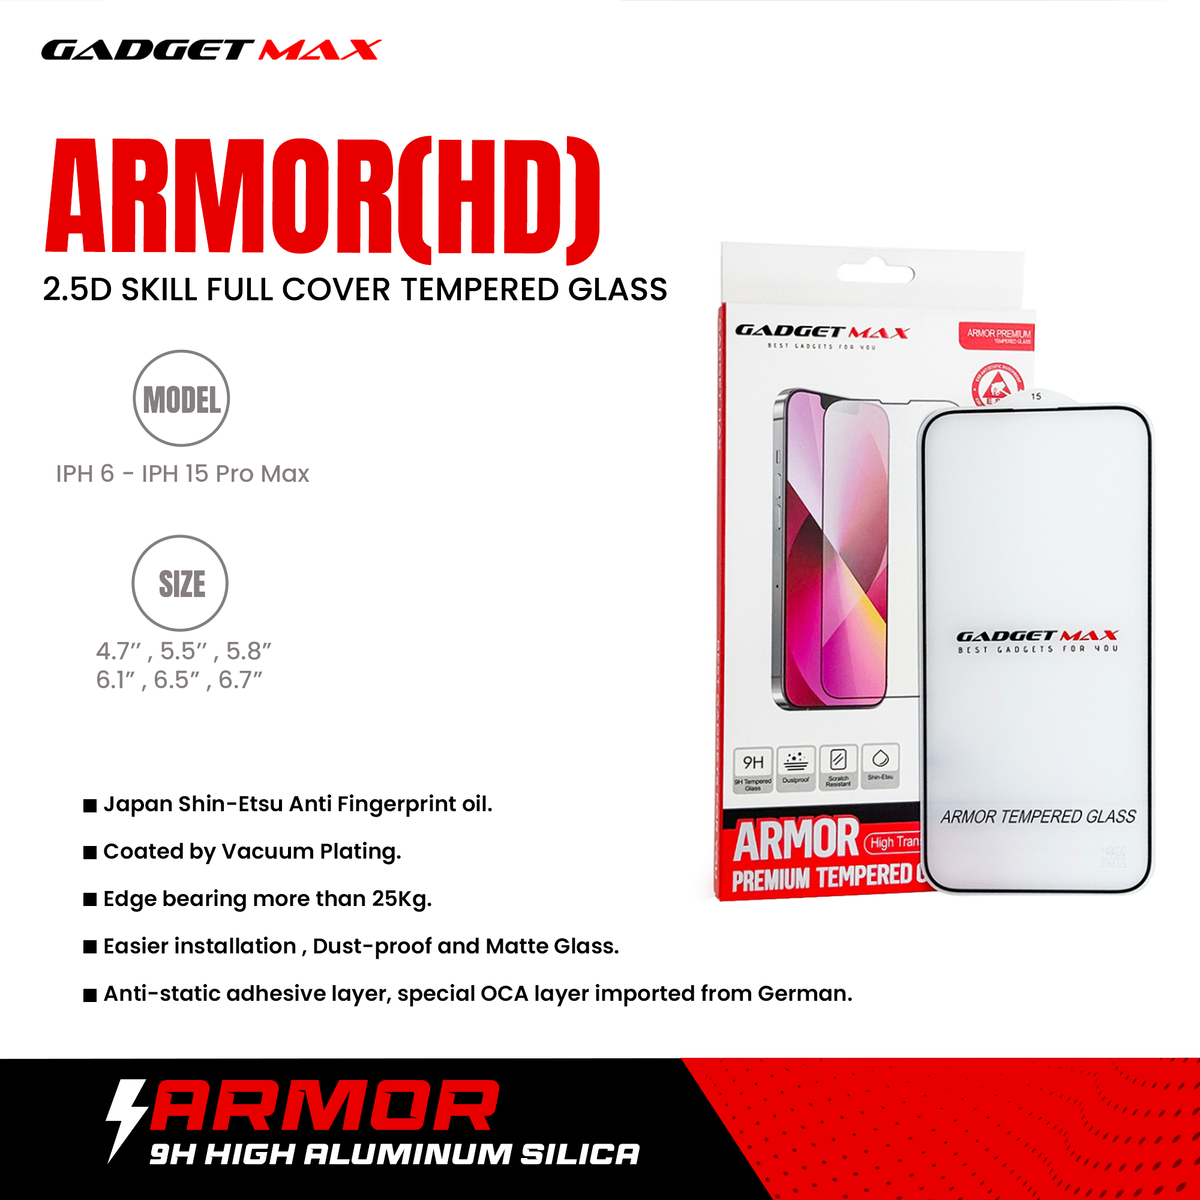 GADGET MAX Armor(HD) iPhone XS  / iPhone 11 Pro 5.8" 2.5D Anti-Static Tempered Glass